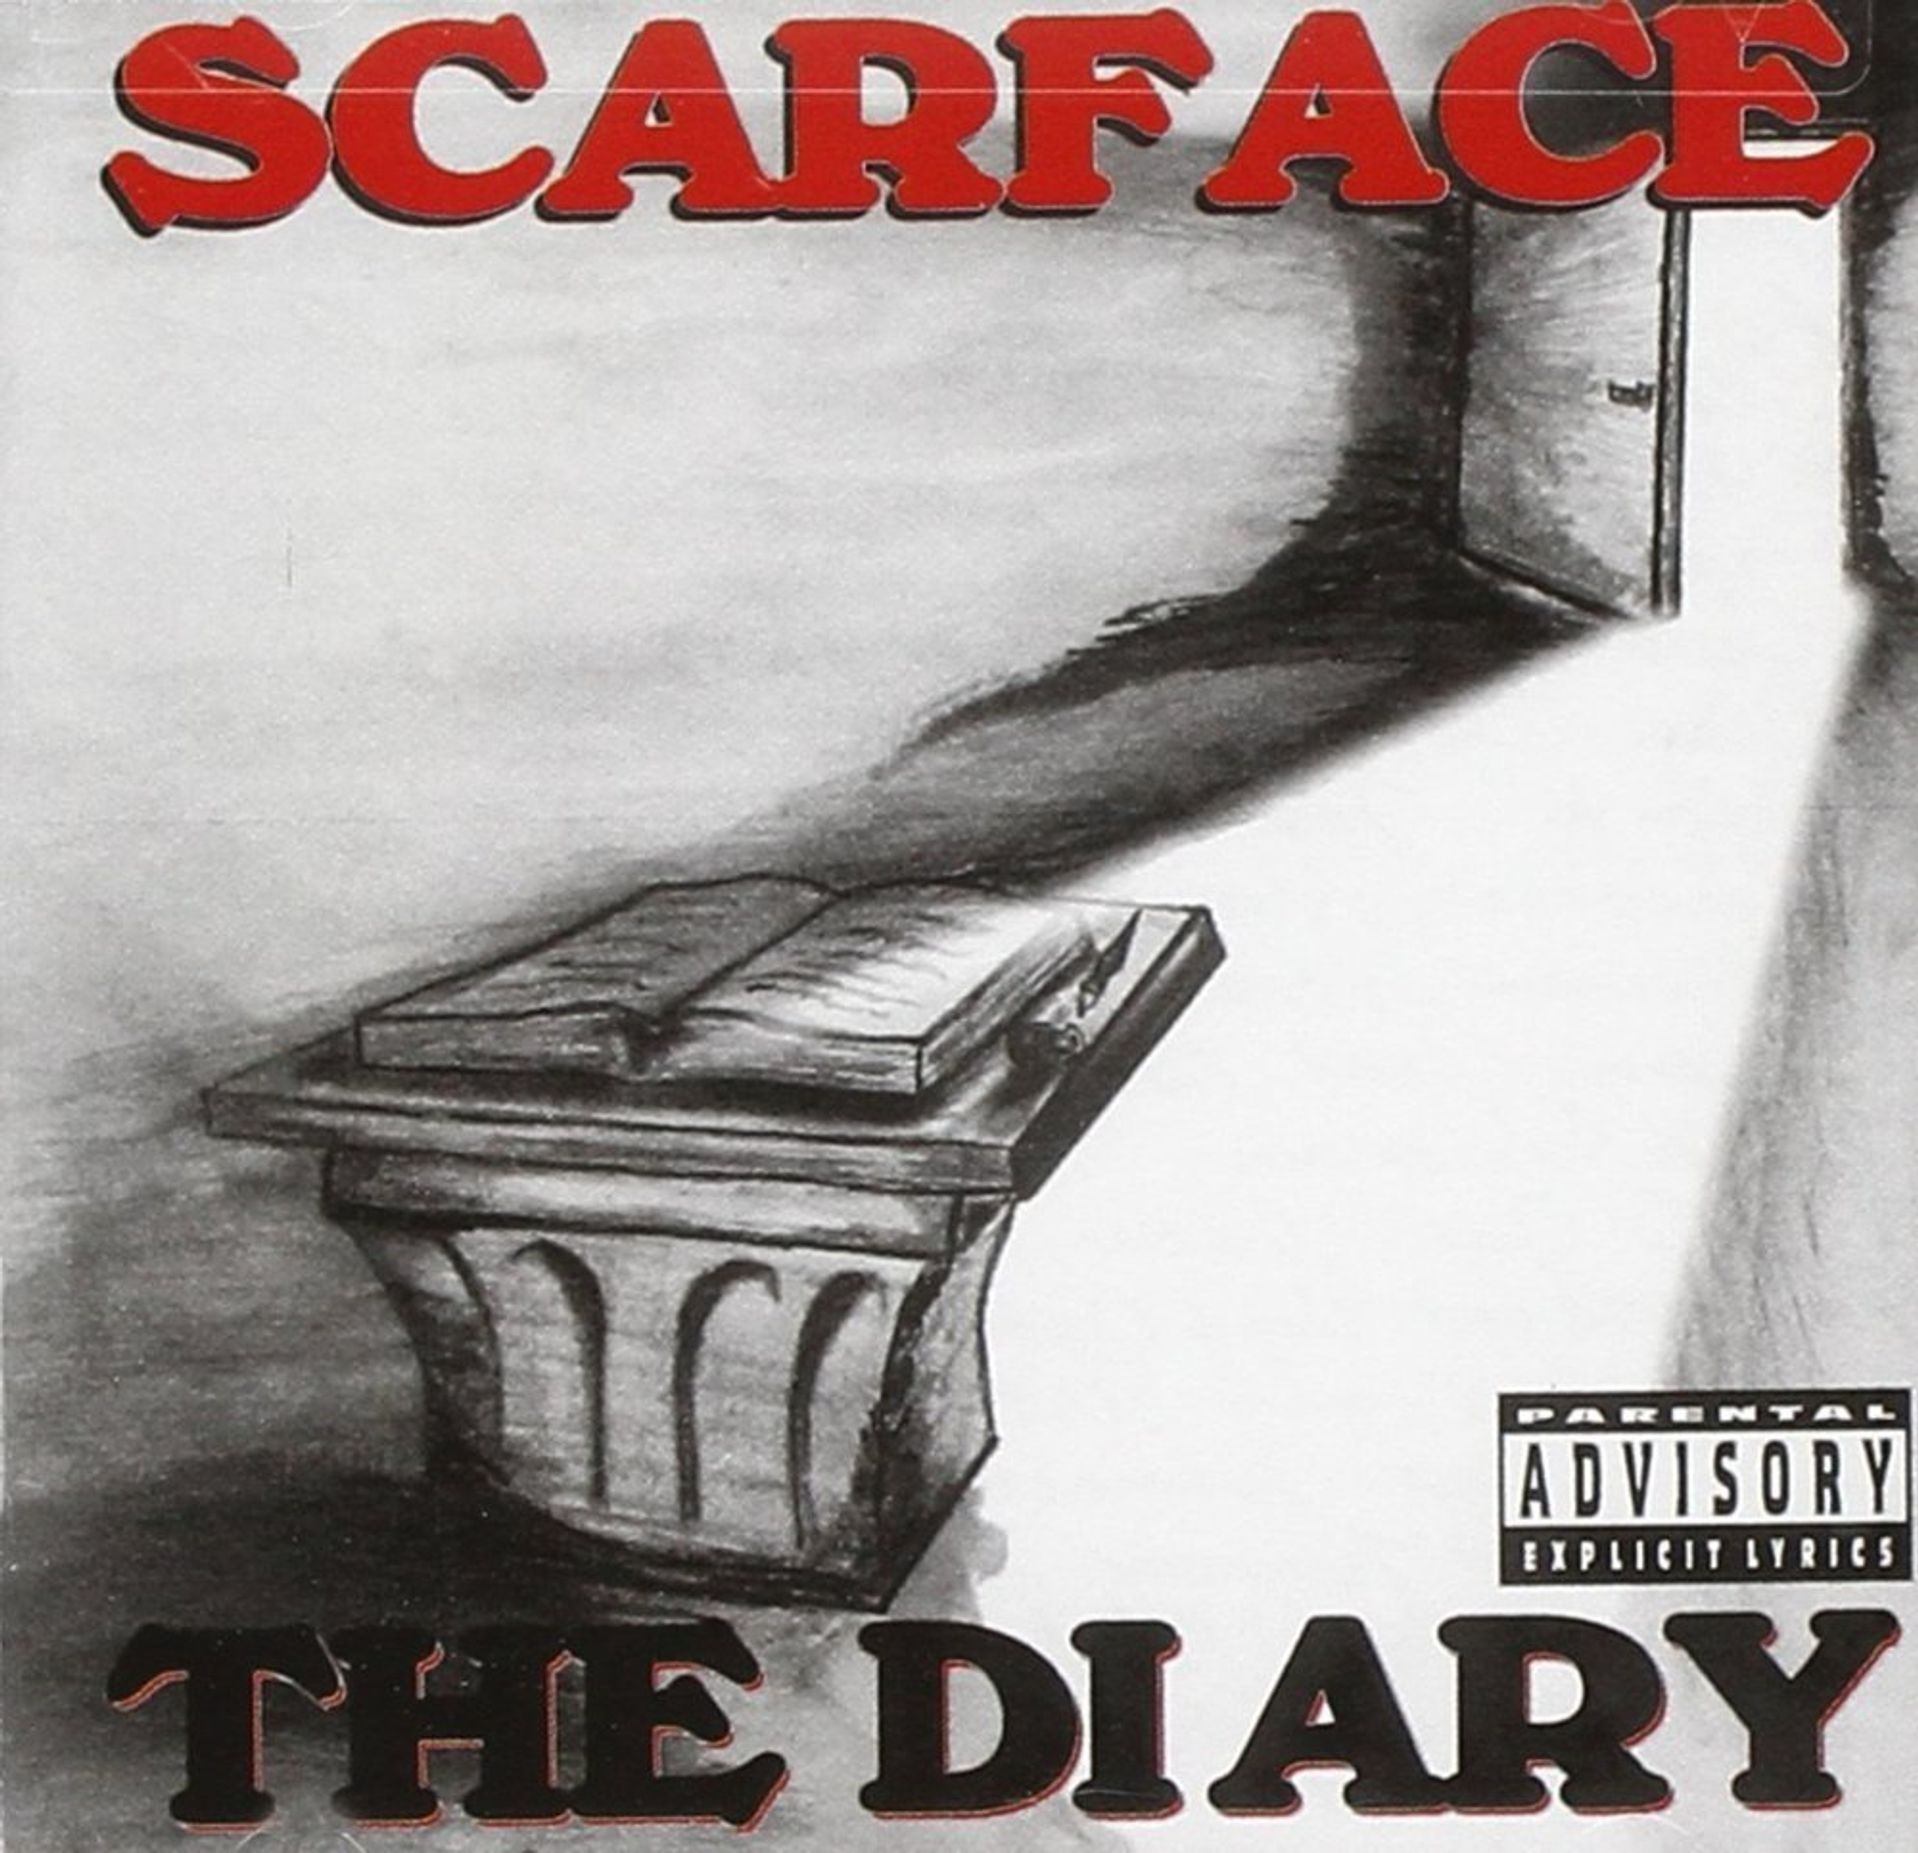 Album Title: The Diary by: Scarface